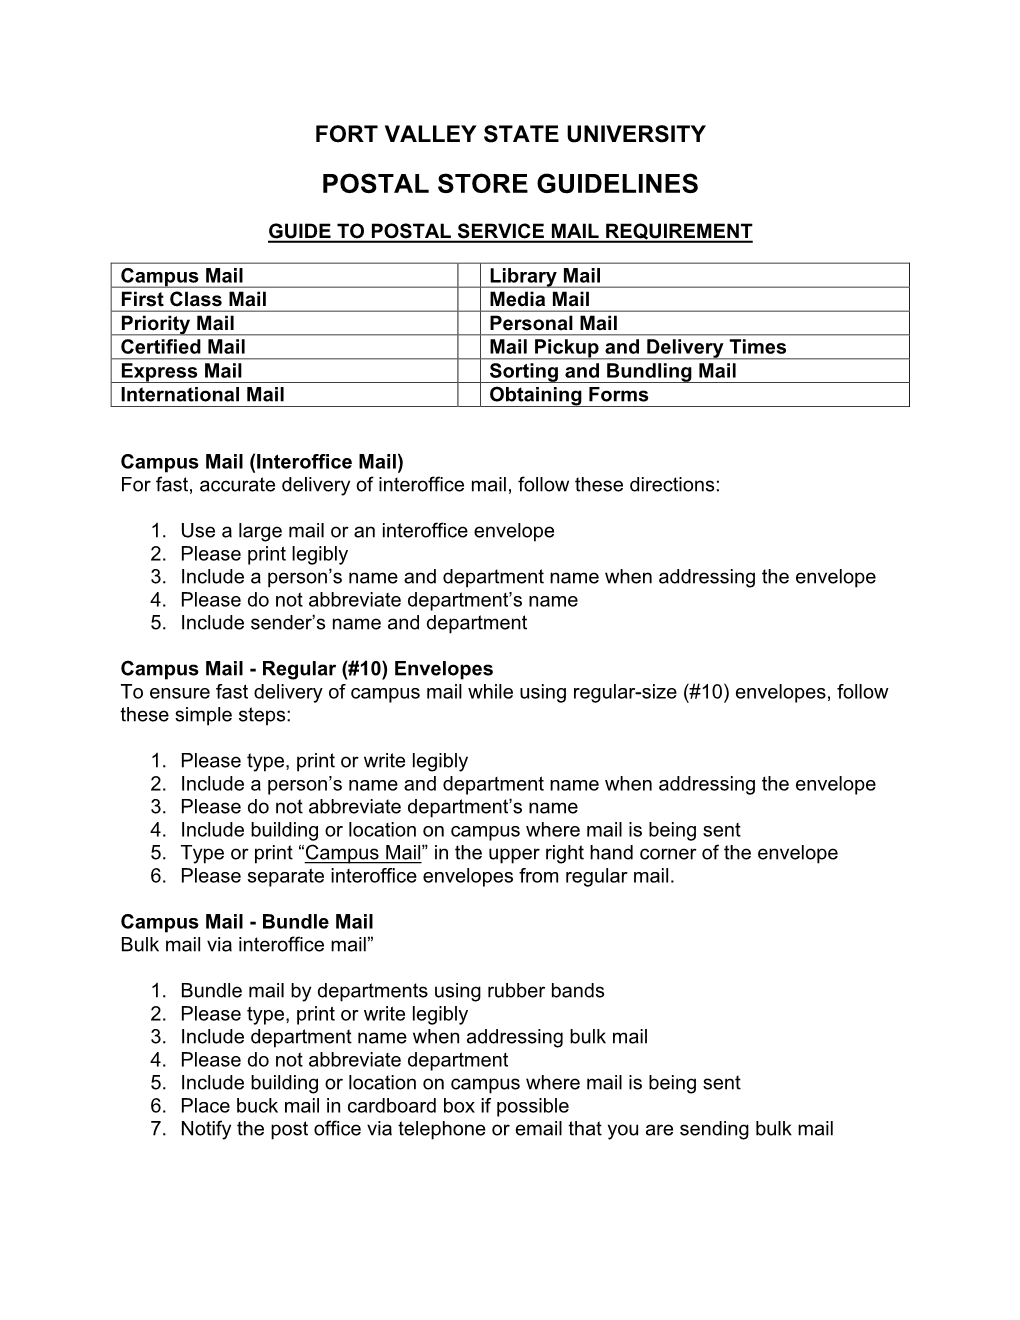 Fort Valley State University Postal Store Guidelines